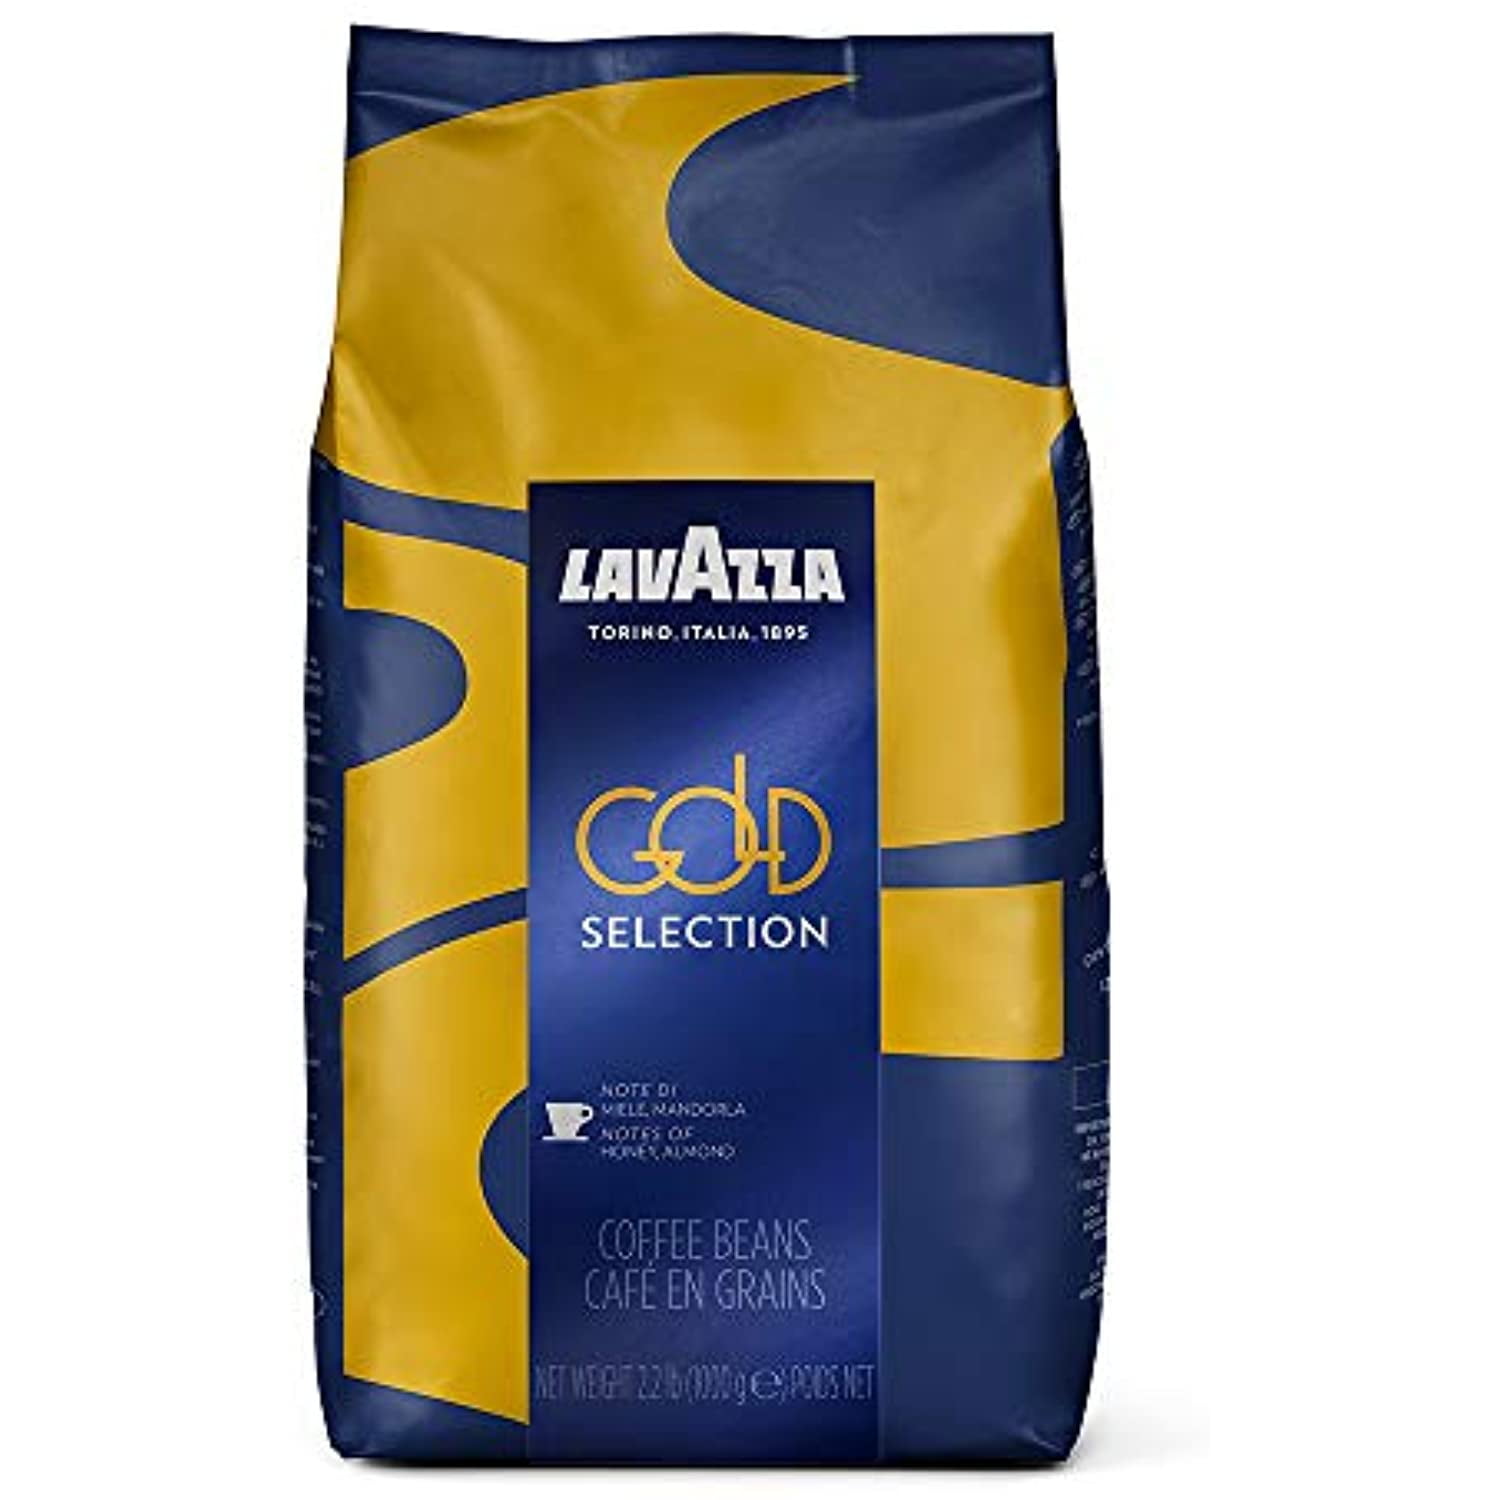 Lavazza Blue Espresso Gold Selection 2 Coffee Capsules (Pack Of 100) ,Value  Pack, Blended and roasted in Italy, Medium Roast with Honey and almond